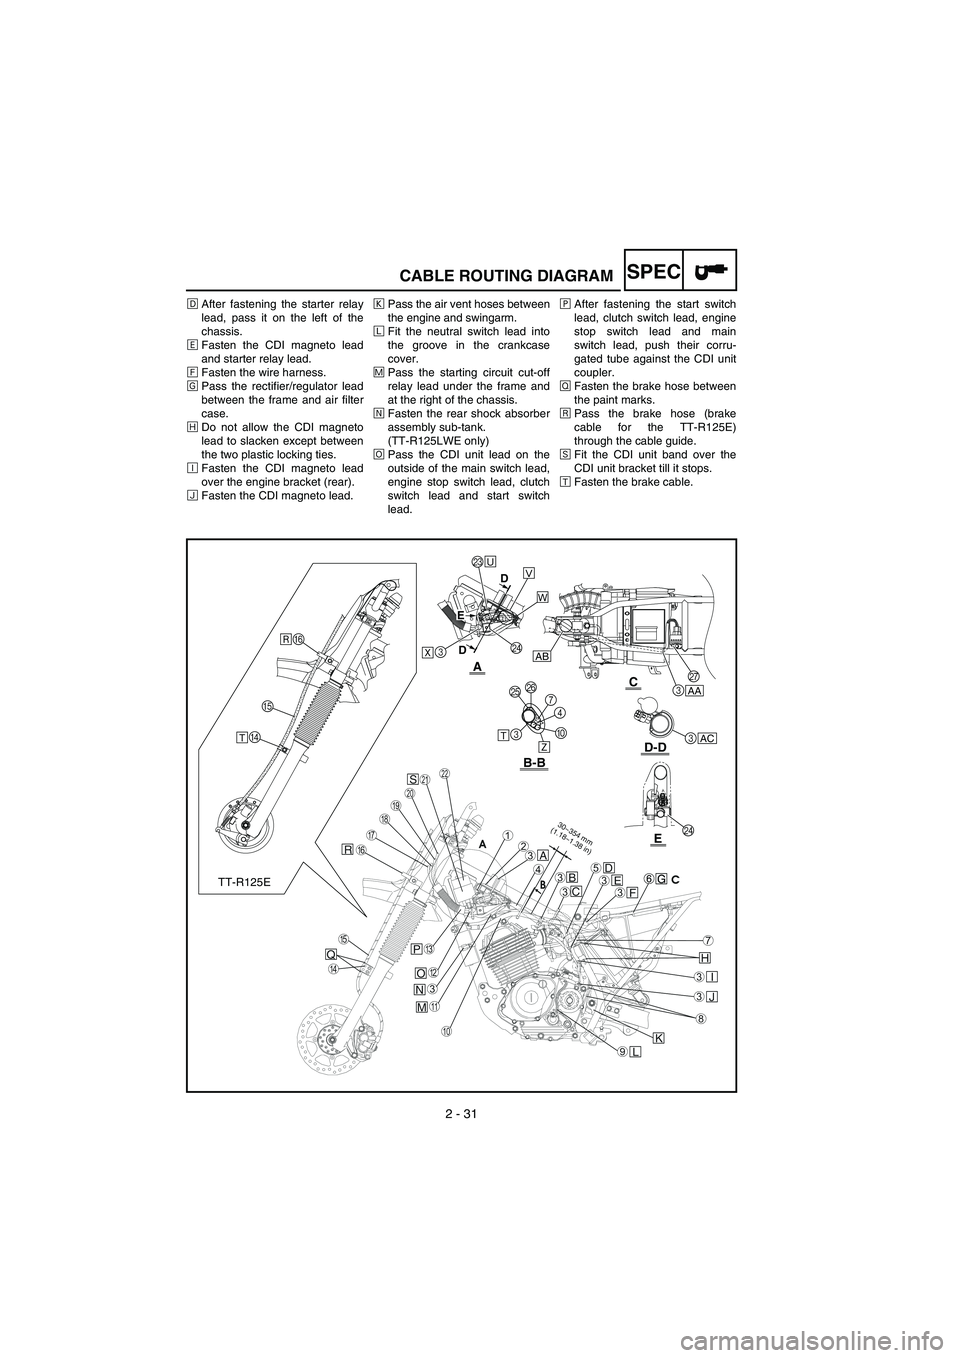 YAMAHA TTR125 2006  Owners Manual 8 - B - V
2 - 31
SPECCABLE ROUTING DIAGRAM
ÎAfter fastening the starter relay
lead, pass it on the left of the
chassis.
‰ Fasten the CDI magneto lead
and starter relay lead.
Ï Fasten the wire harn